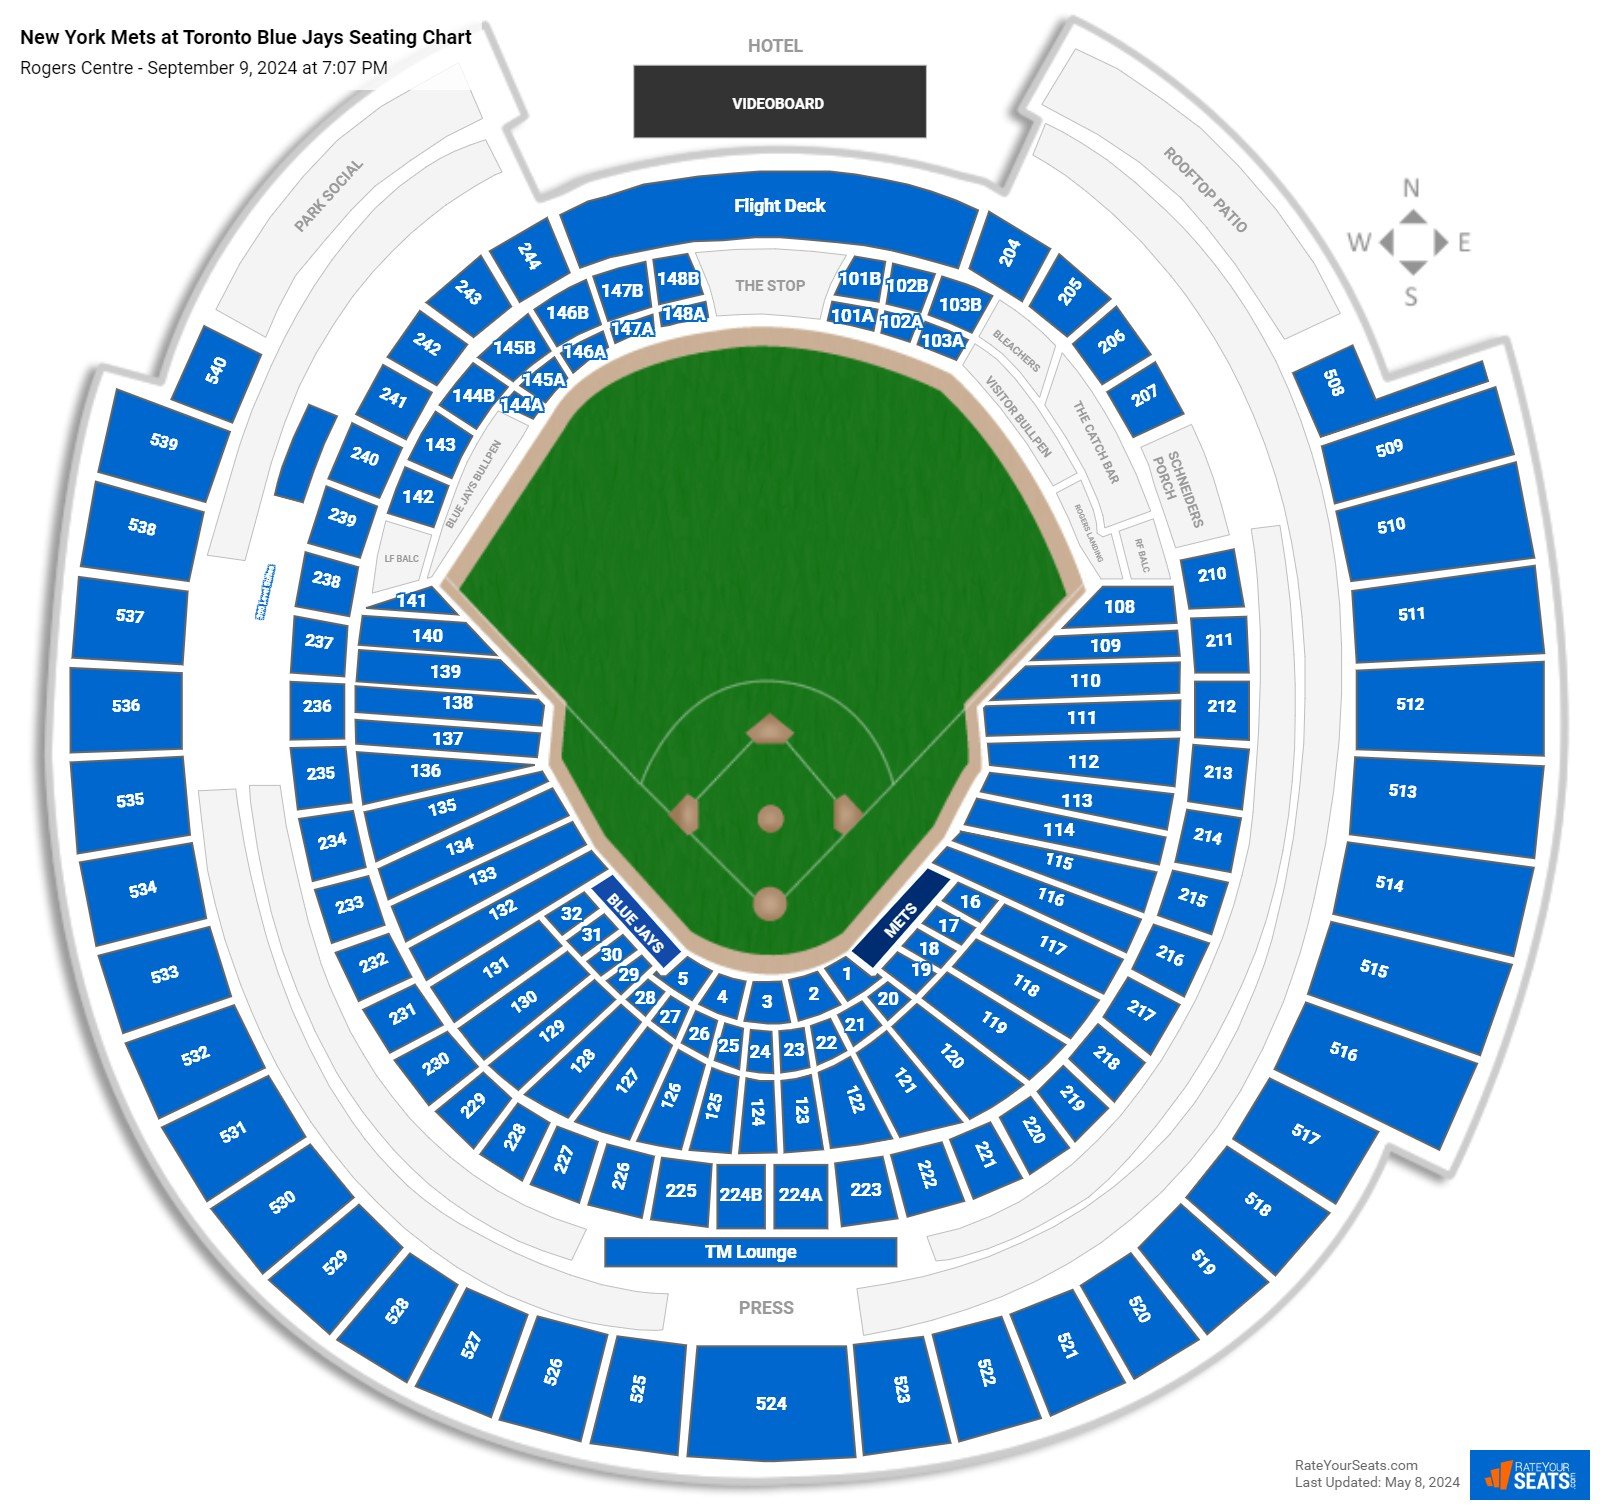 New York Mets at Toronto Blue Jays seating chart Rogers Centre